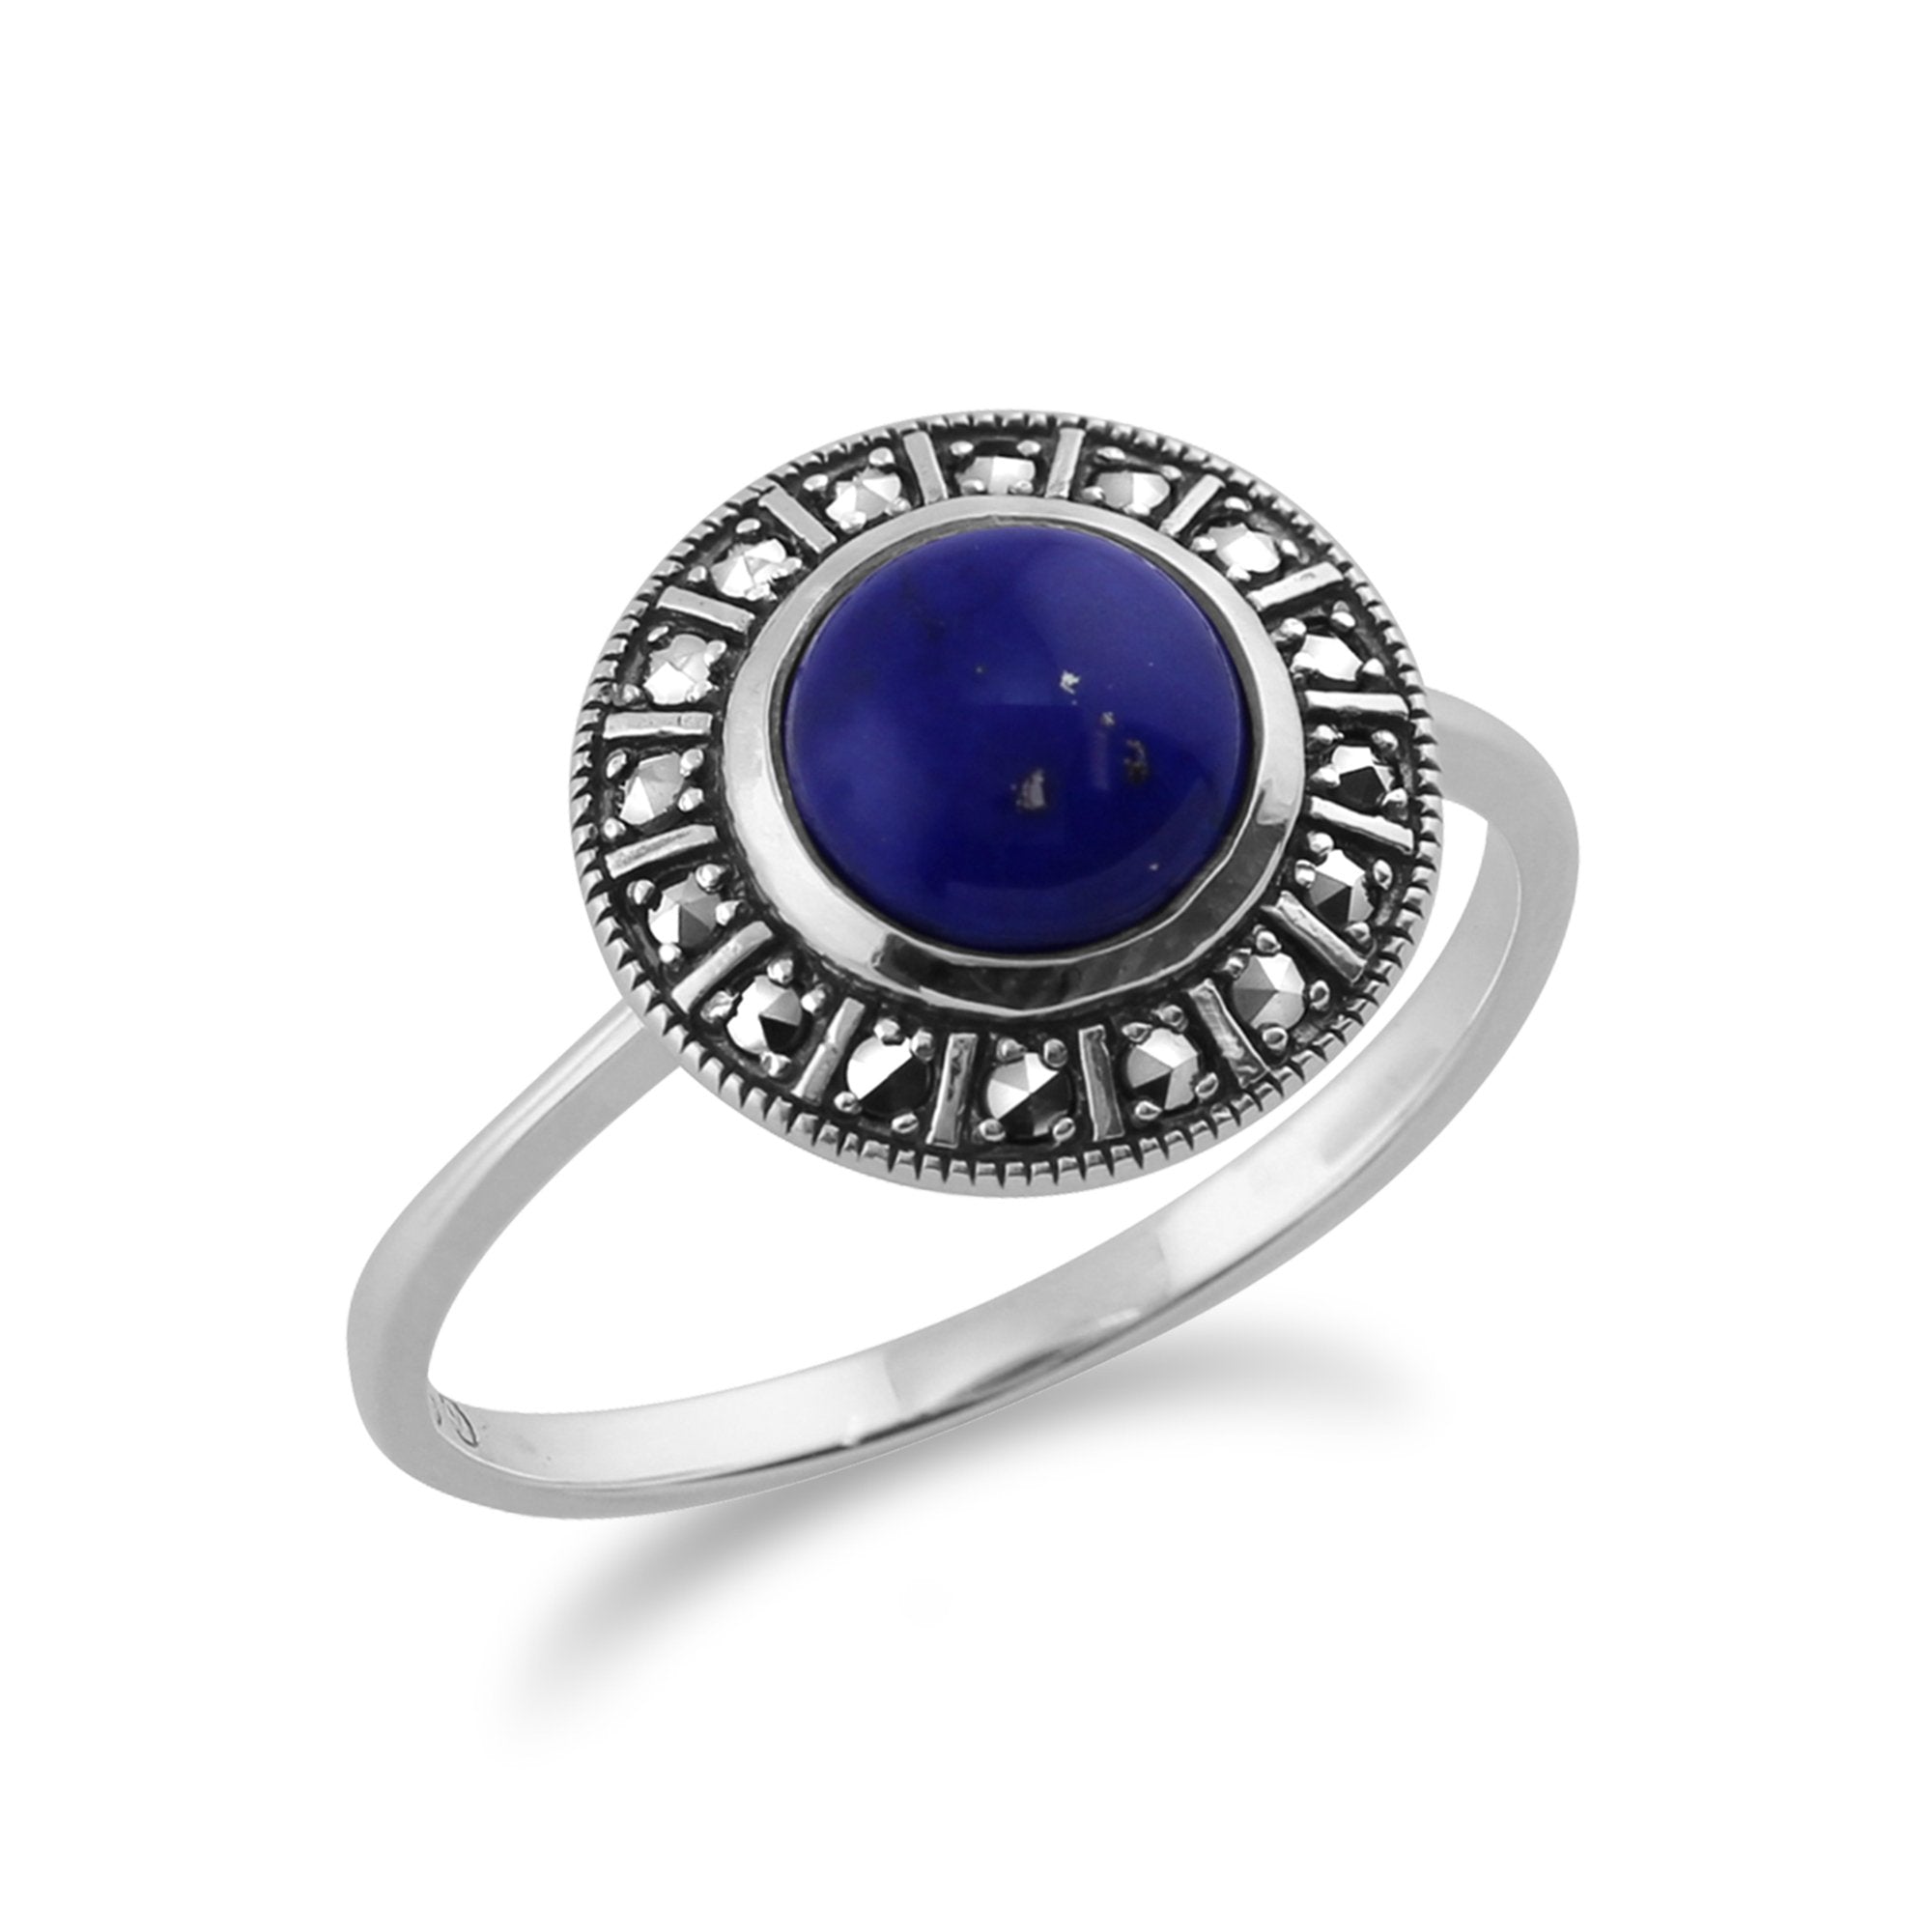 Art Deco Style Round Lapis Lazuli Cabochon & Marcasite Halo Ring in 925 Sterling Silver